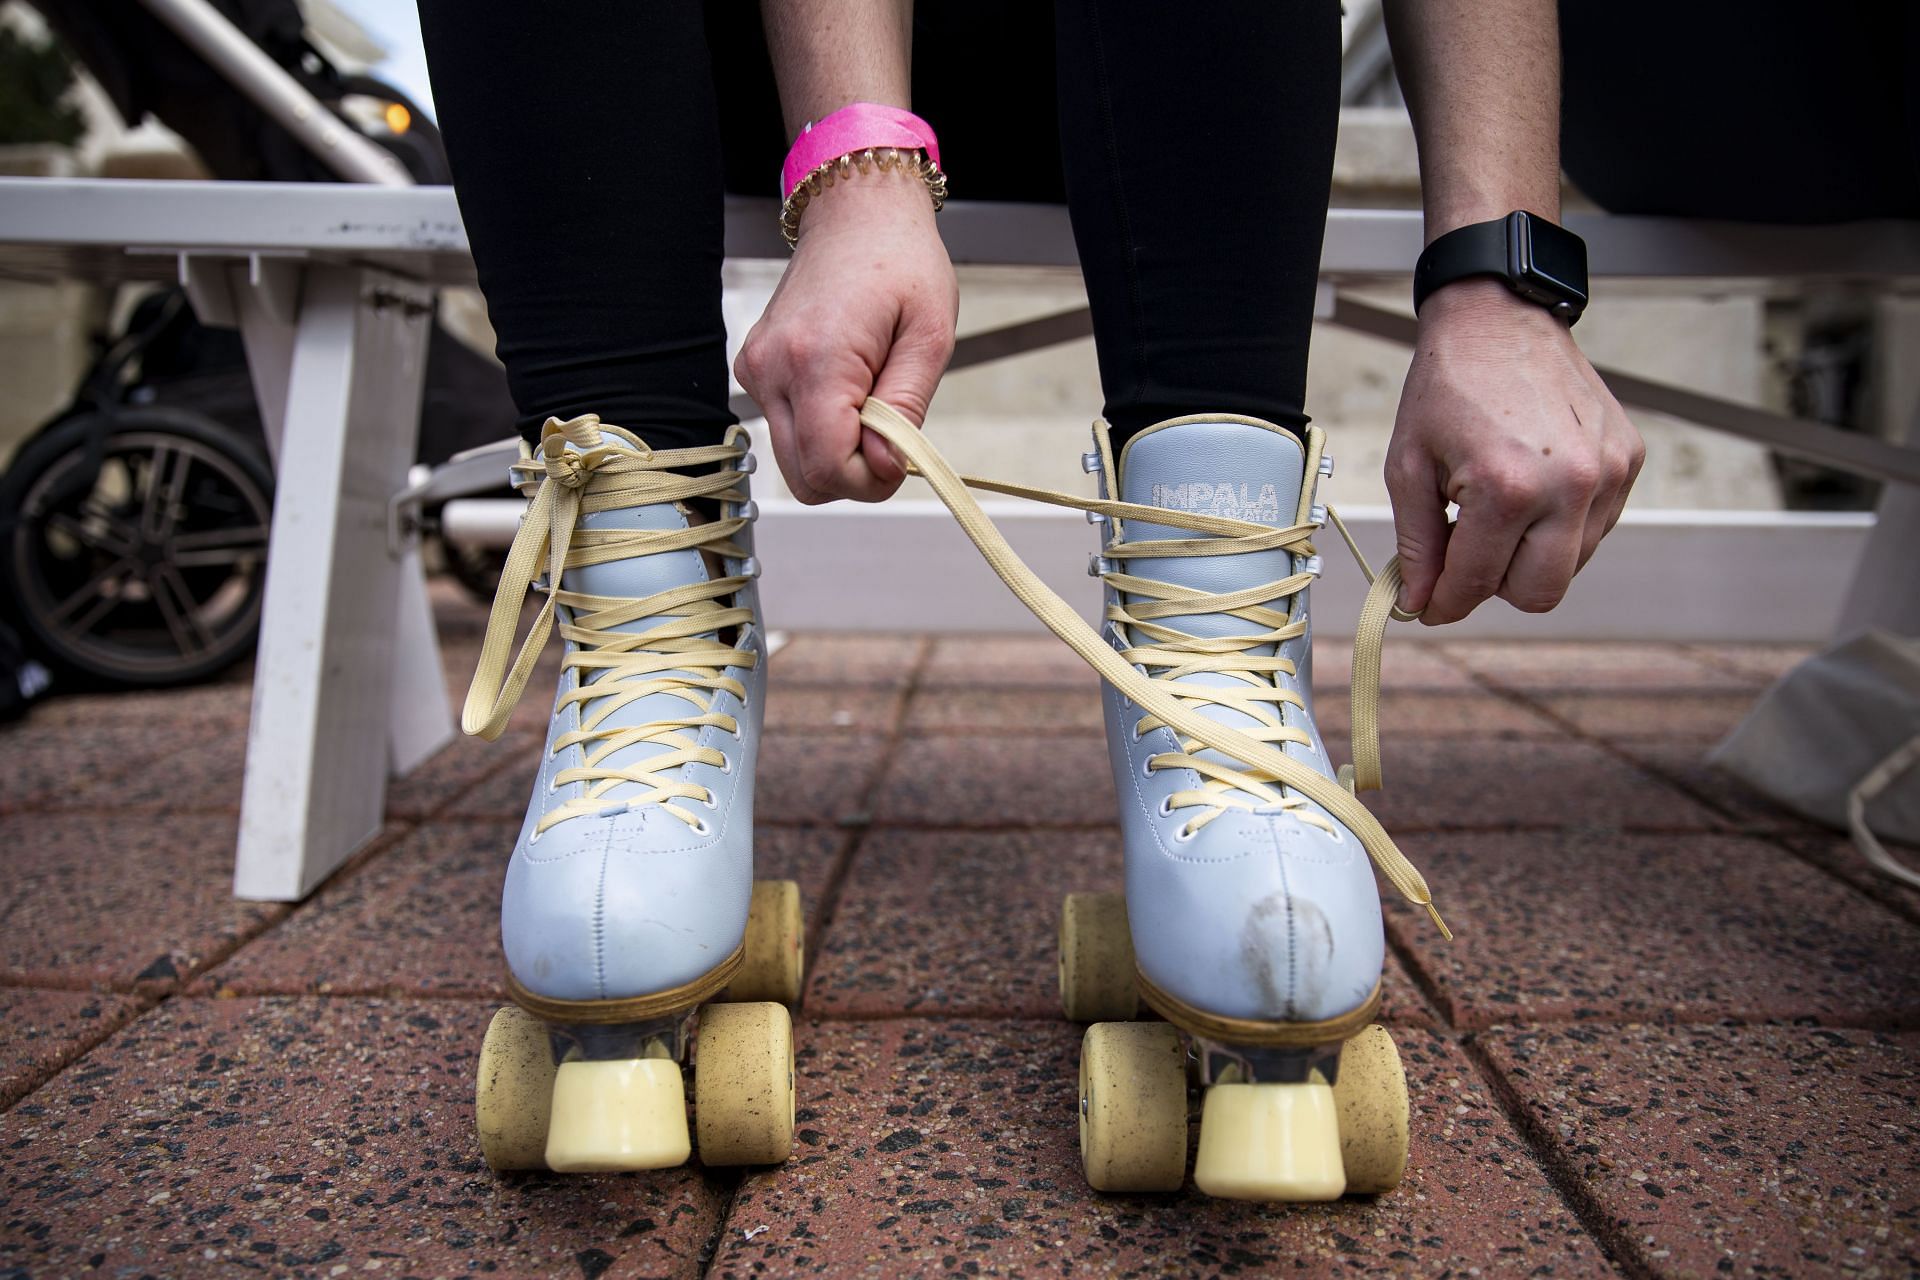 The two-day All India Roller Skating Championship 2022 will be held at the Gaikwad-Patil International School in Nagpur. (Getty Images)